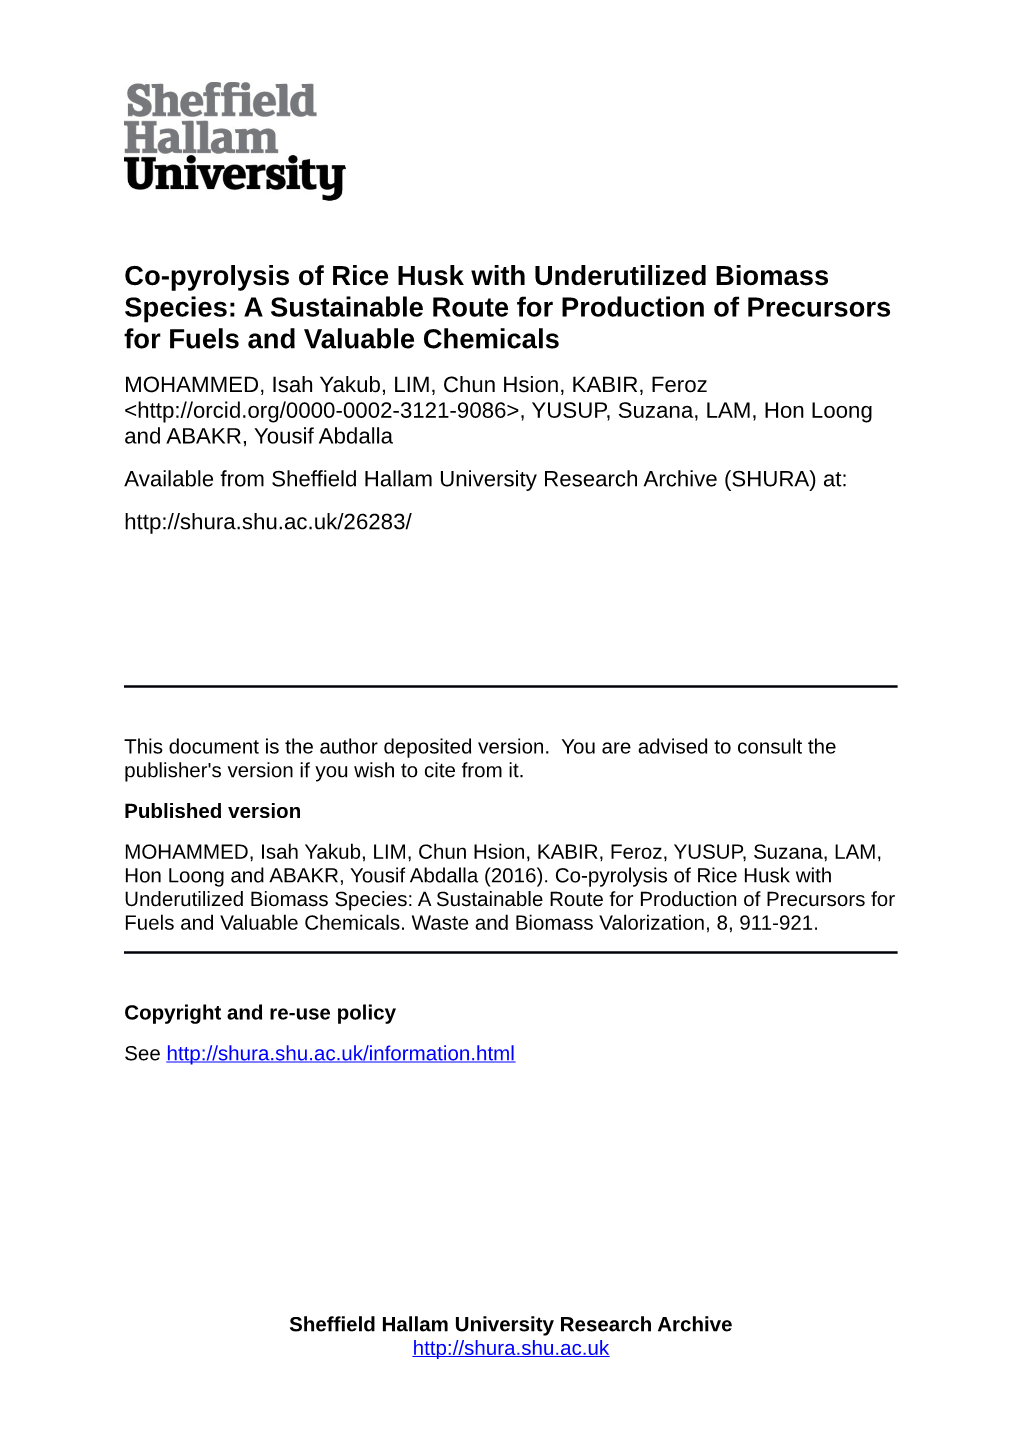 Co-Pyrolysis of Rice Husk with Underutilized Biomass Species: A